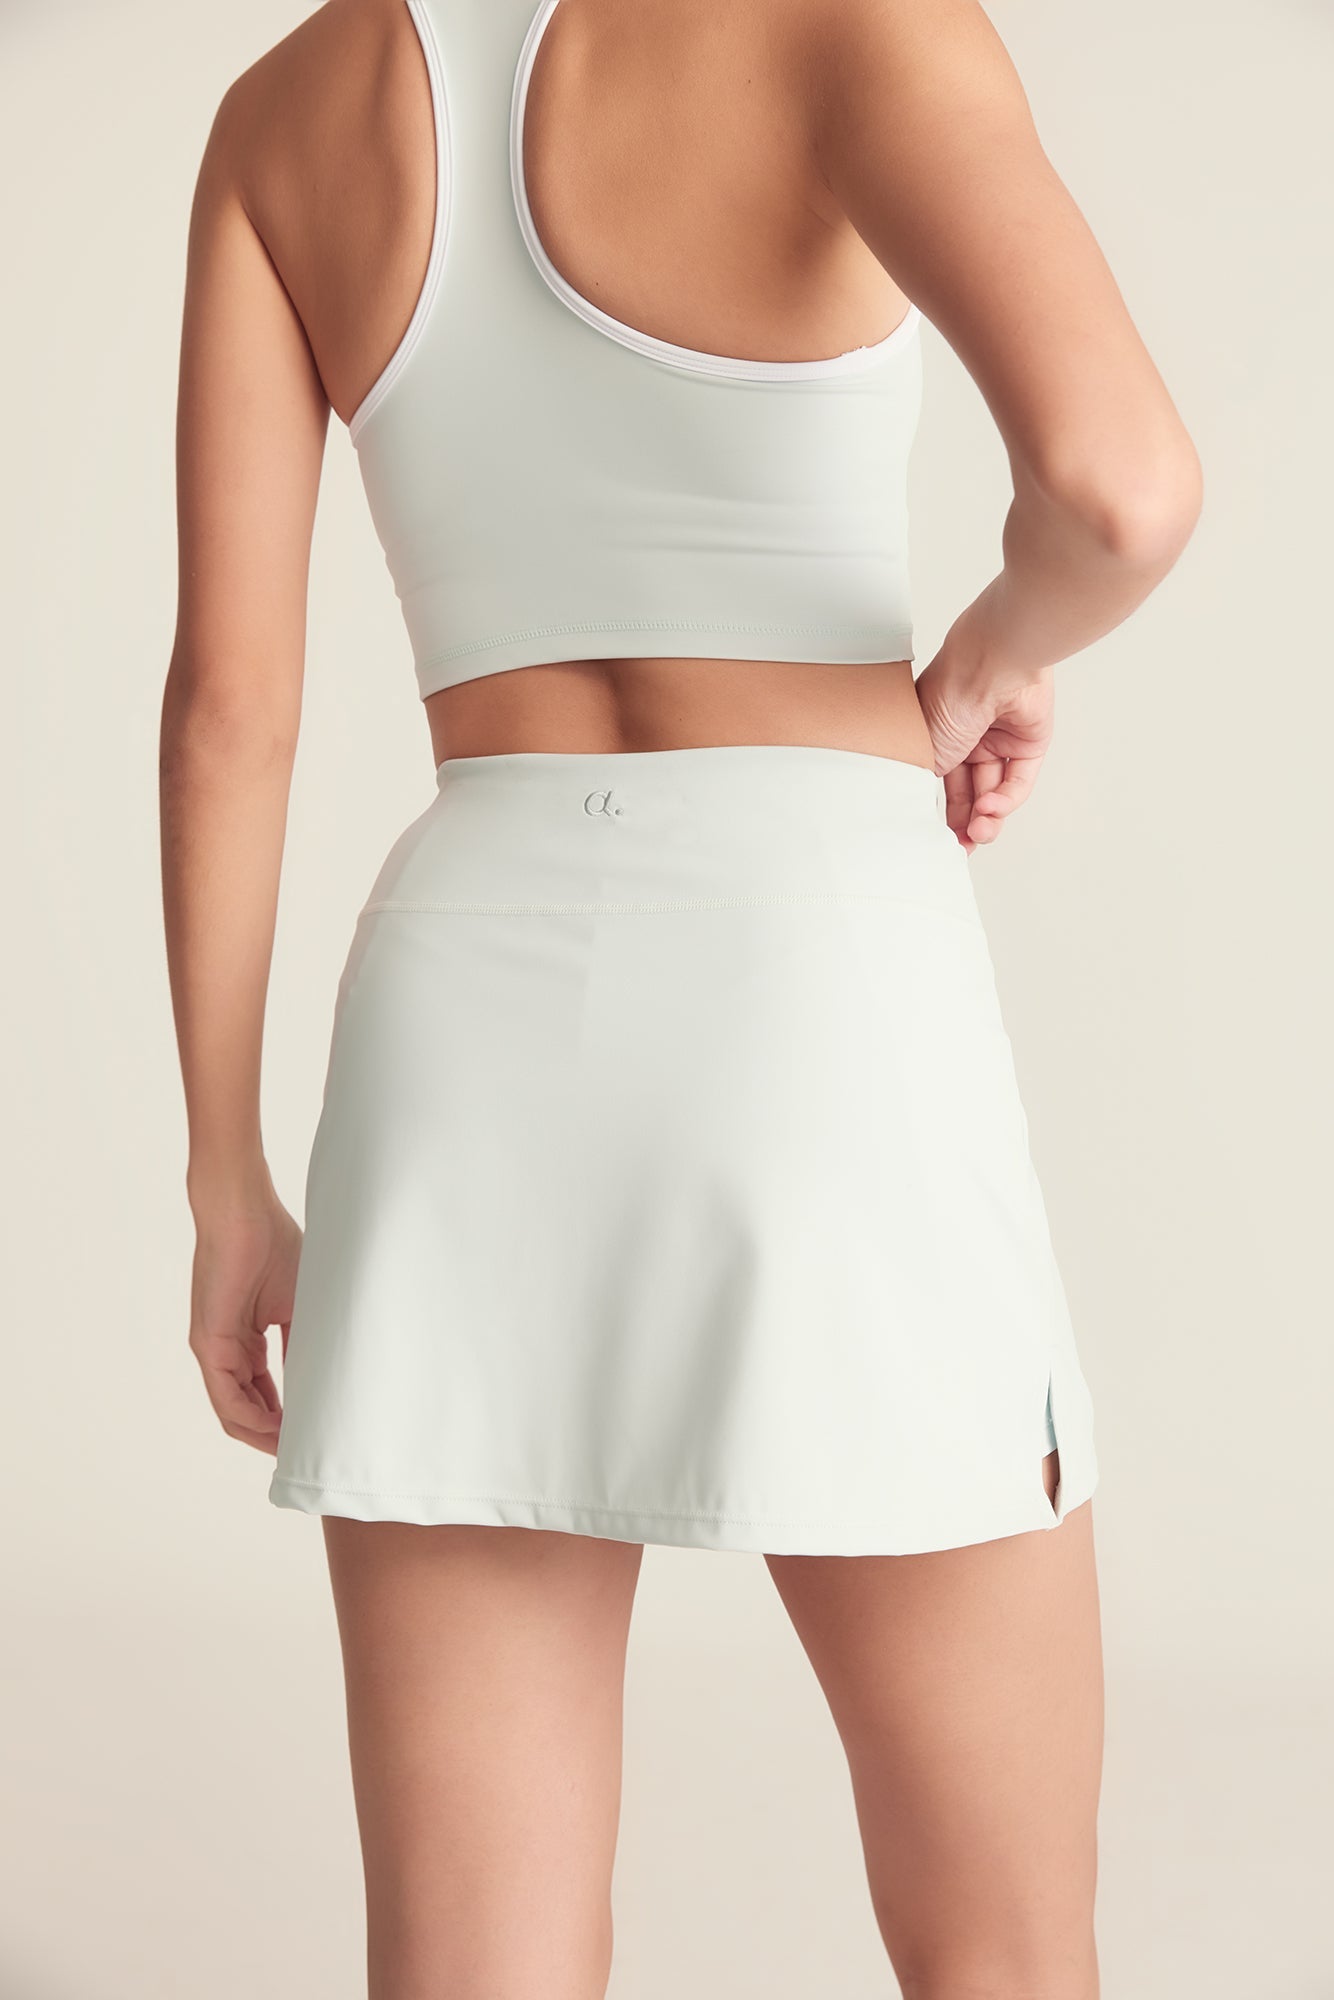 [IMPERFECT] of A-Line Skort in Ice